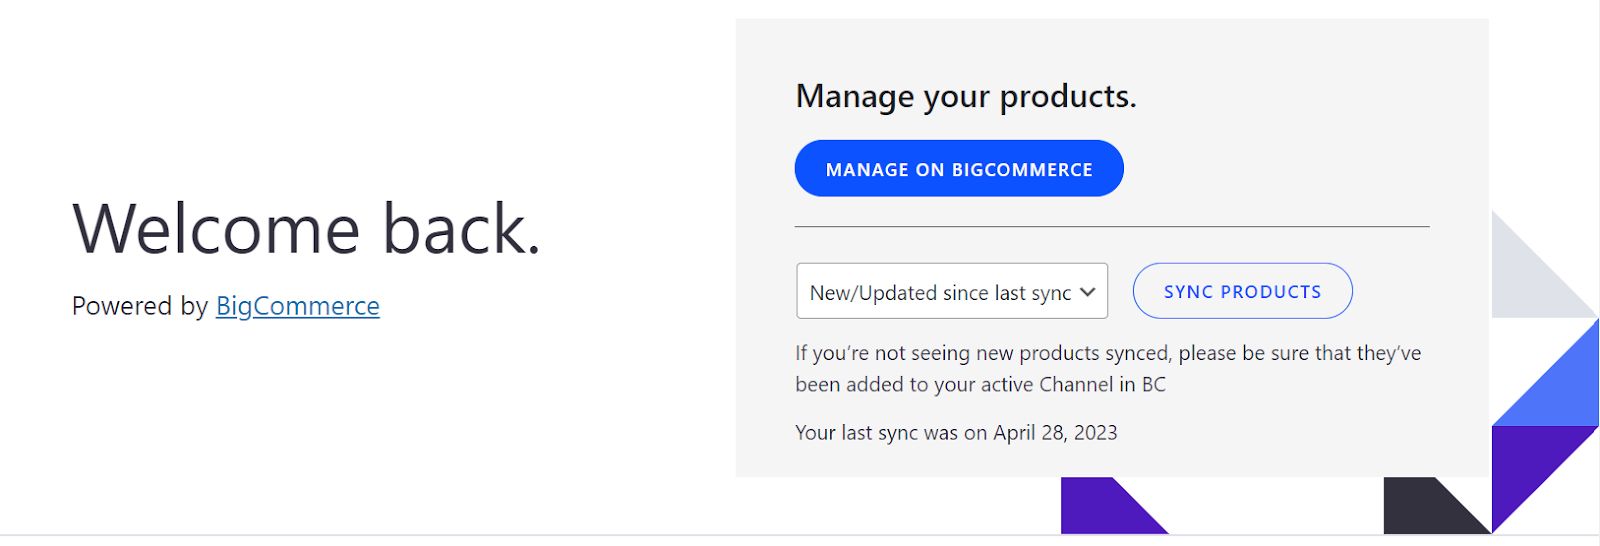 A product sync can keep your channels up to date. 